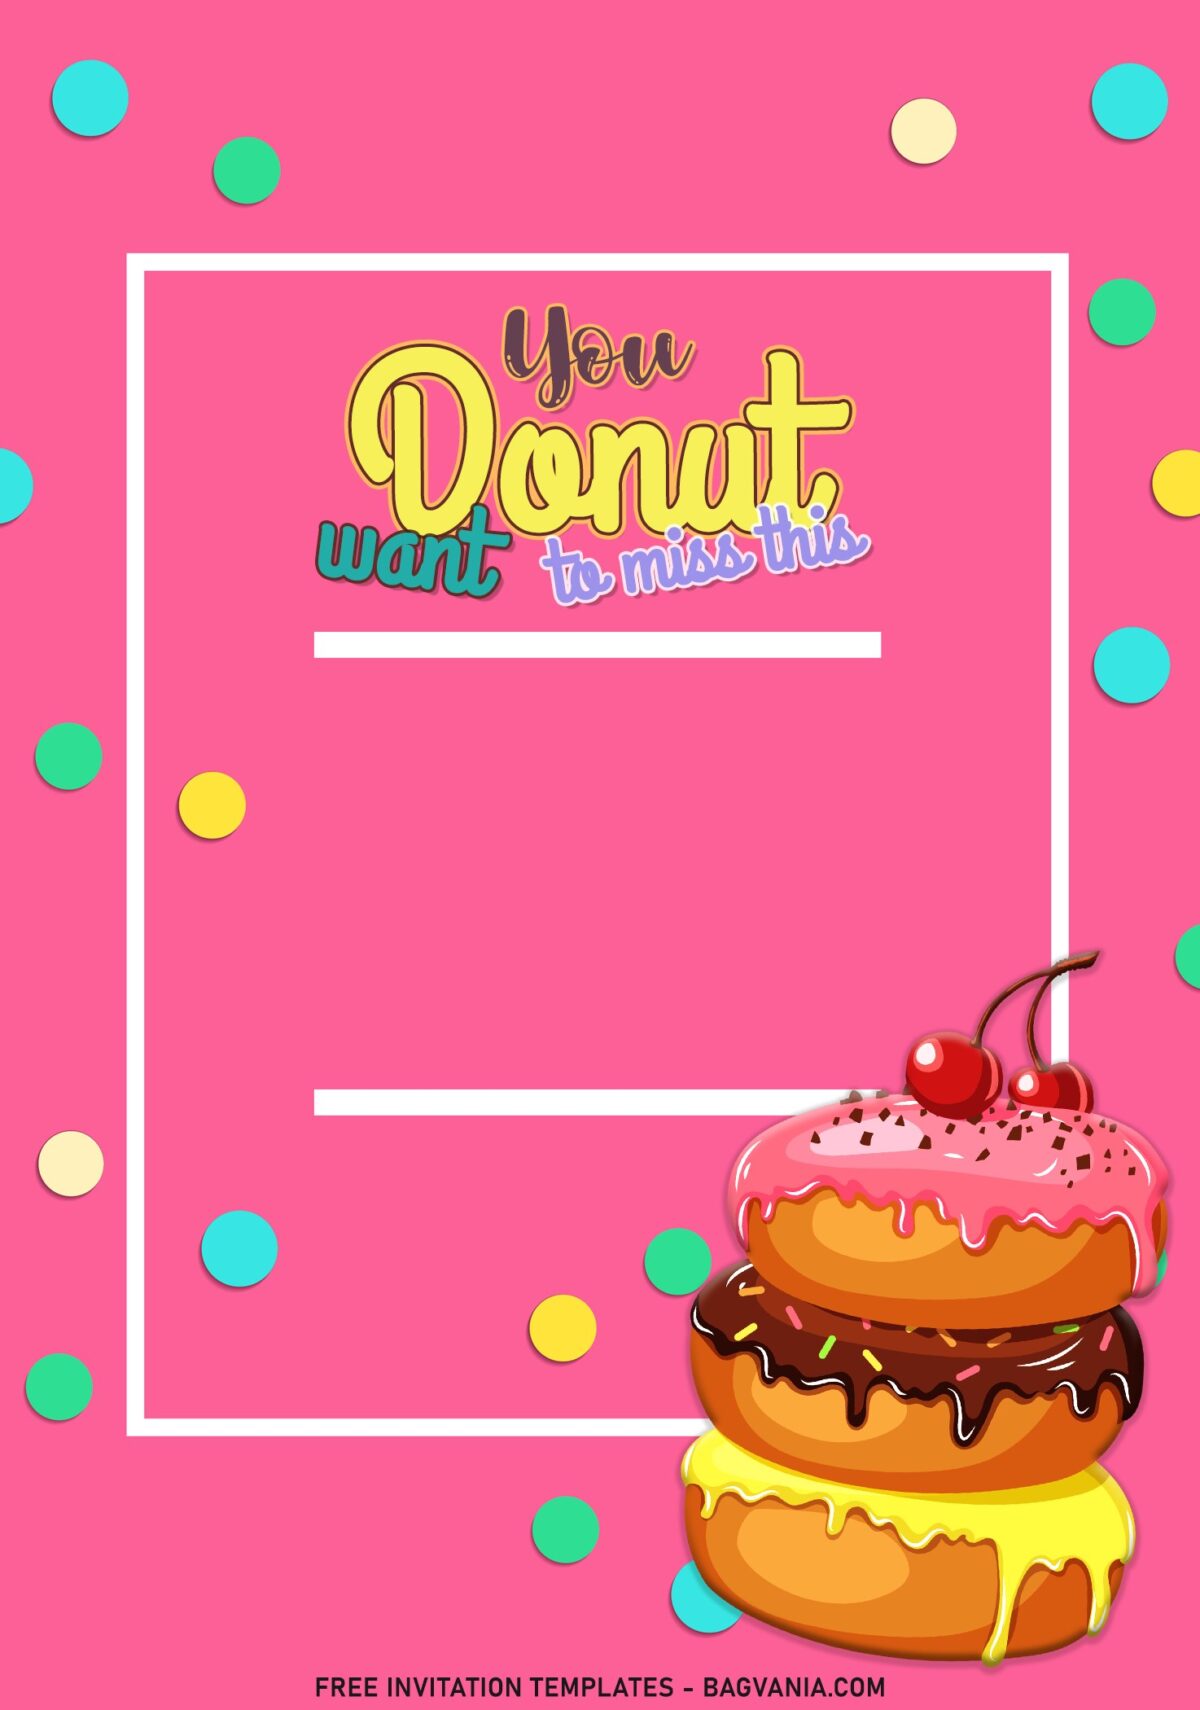 7+ Donut And Sprinkle Invitation Templates For Your Cute Little Girl's Birthday with donut miss this party wording